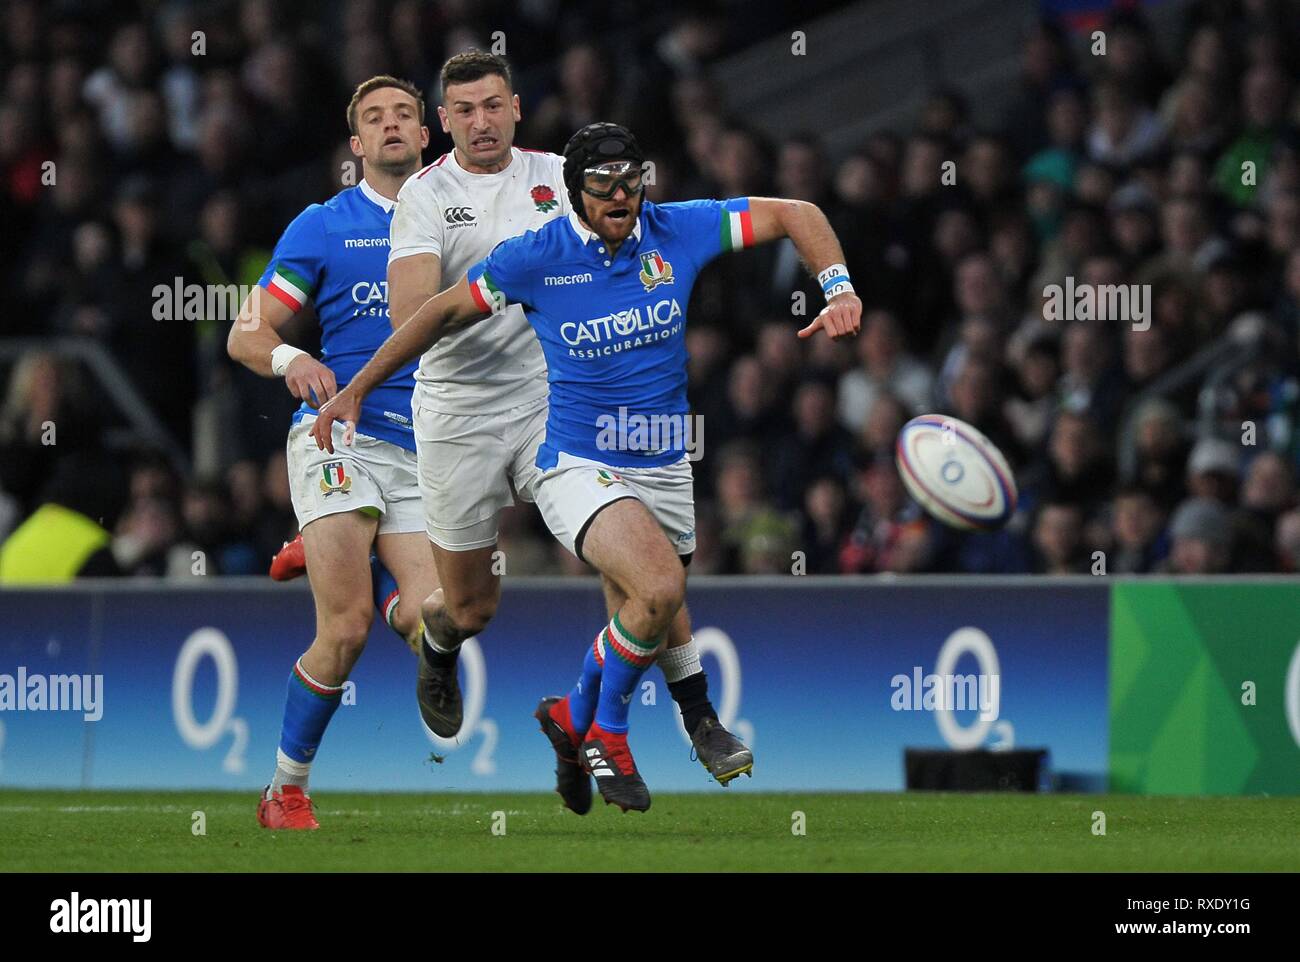 Londres, Royaume-Uni. 09Th Mar, 2019. Ian McKinley (Italie) et Owen Farrell (Angleterre, le capitaine) Chase. L'Angleterre V Italie. Six nations rugby Guinness. Le stade de Twickenham. Credit : Sport en images/Alamy Live News Banque D'Images